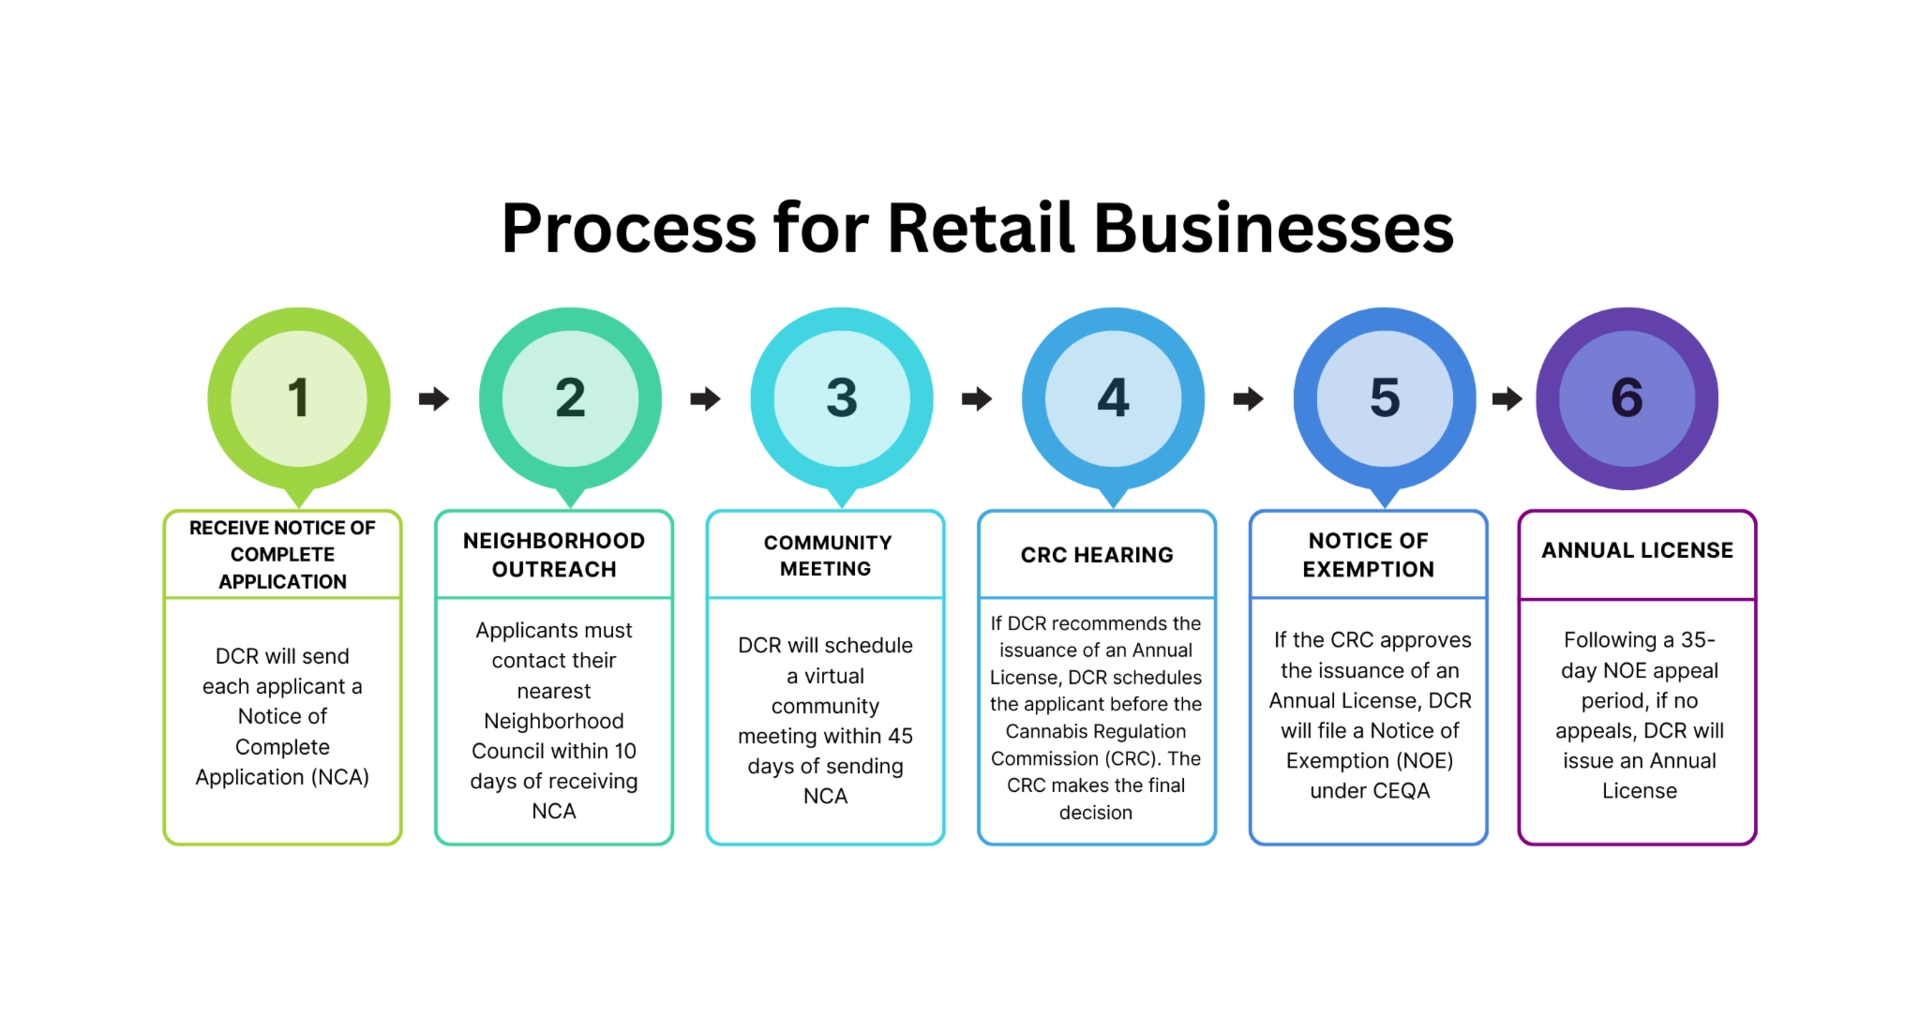 Process for Retail Business Infographic - Details Below